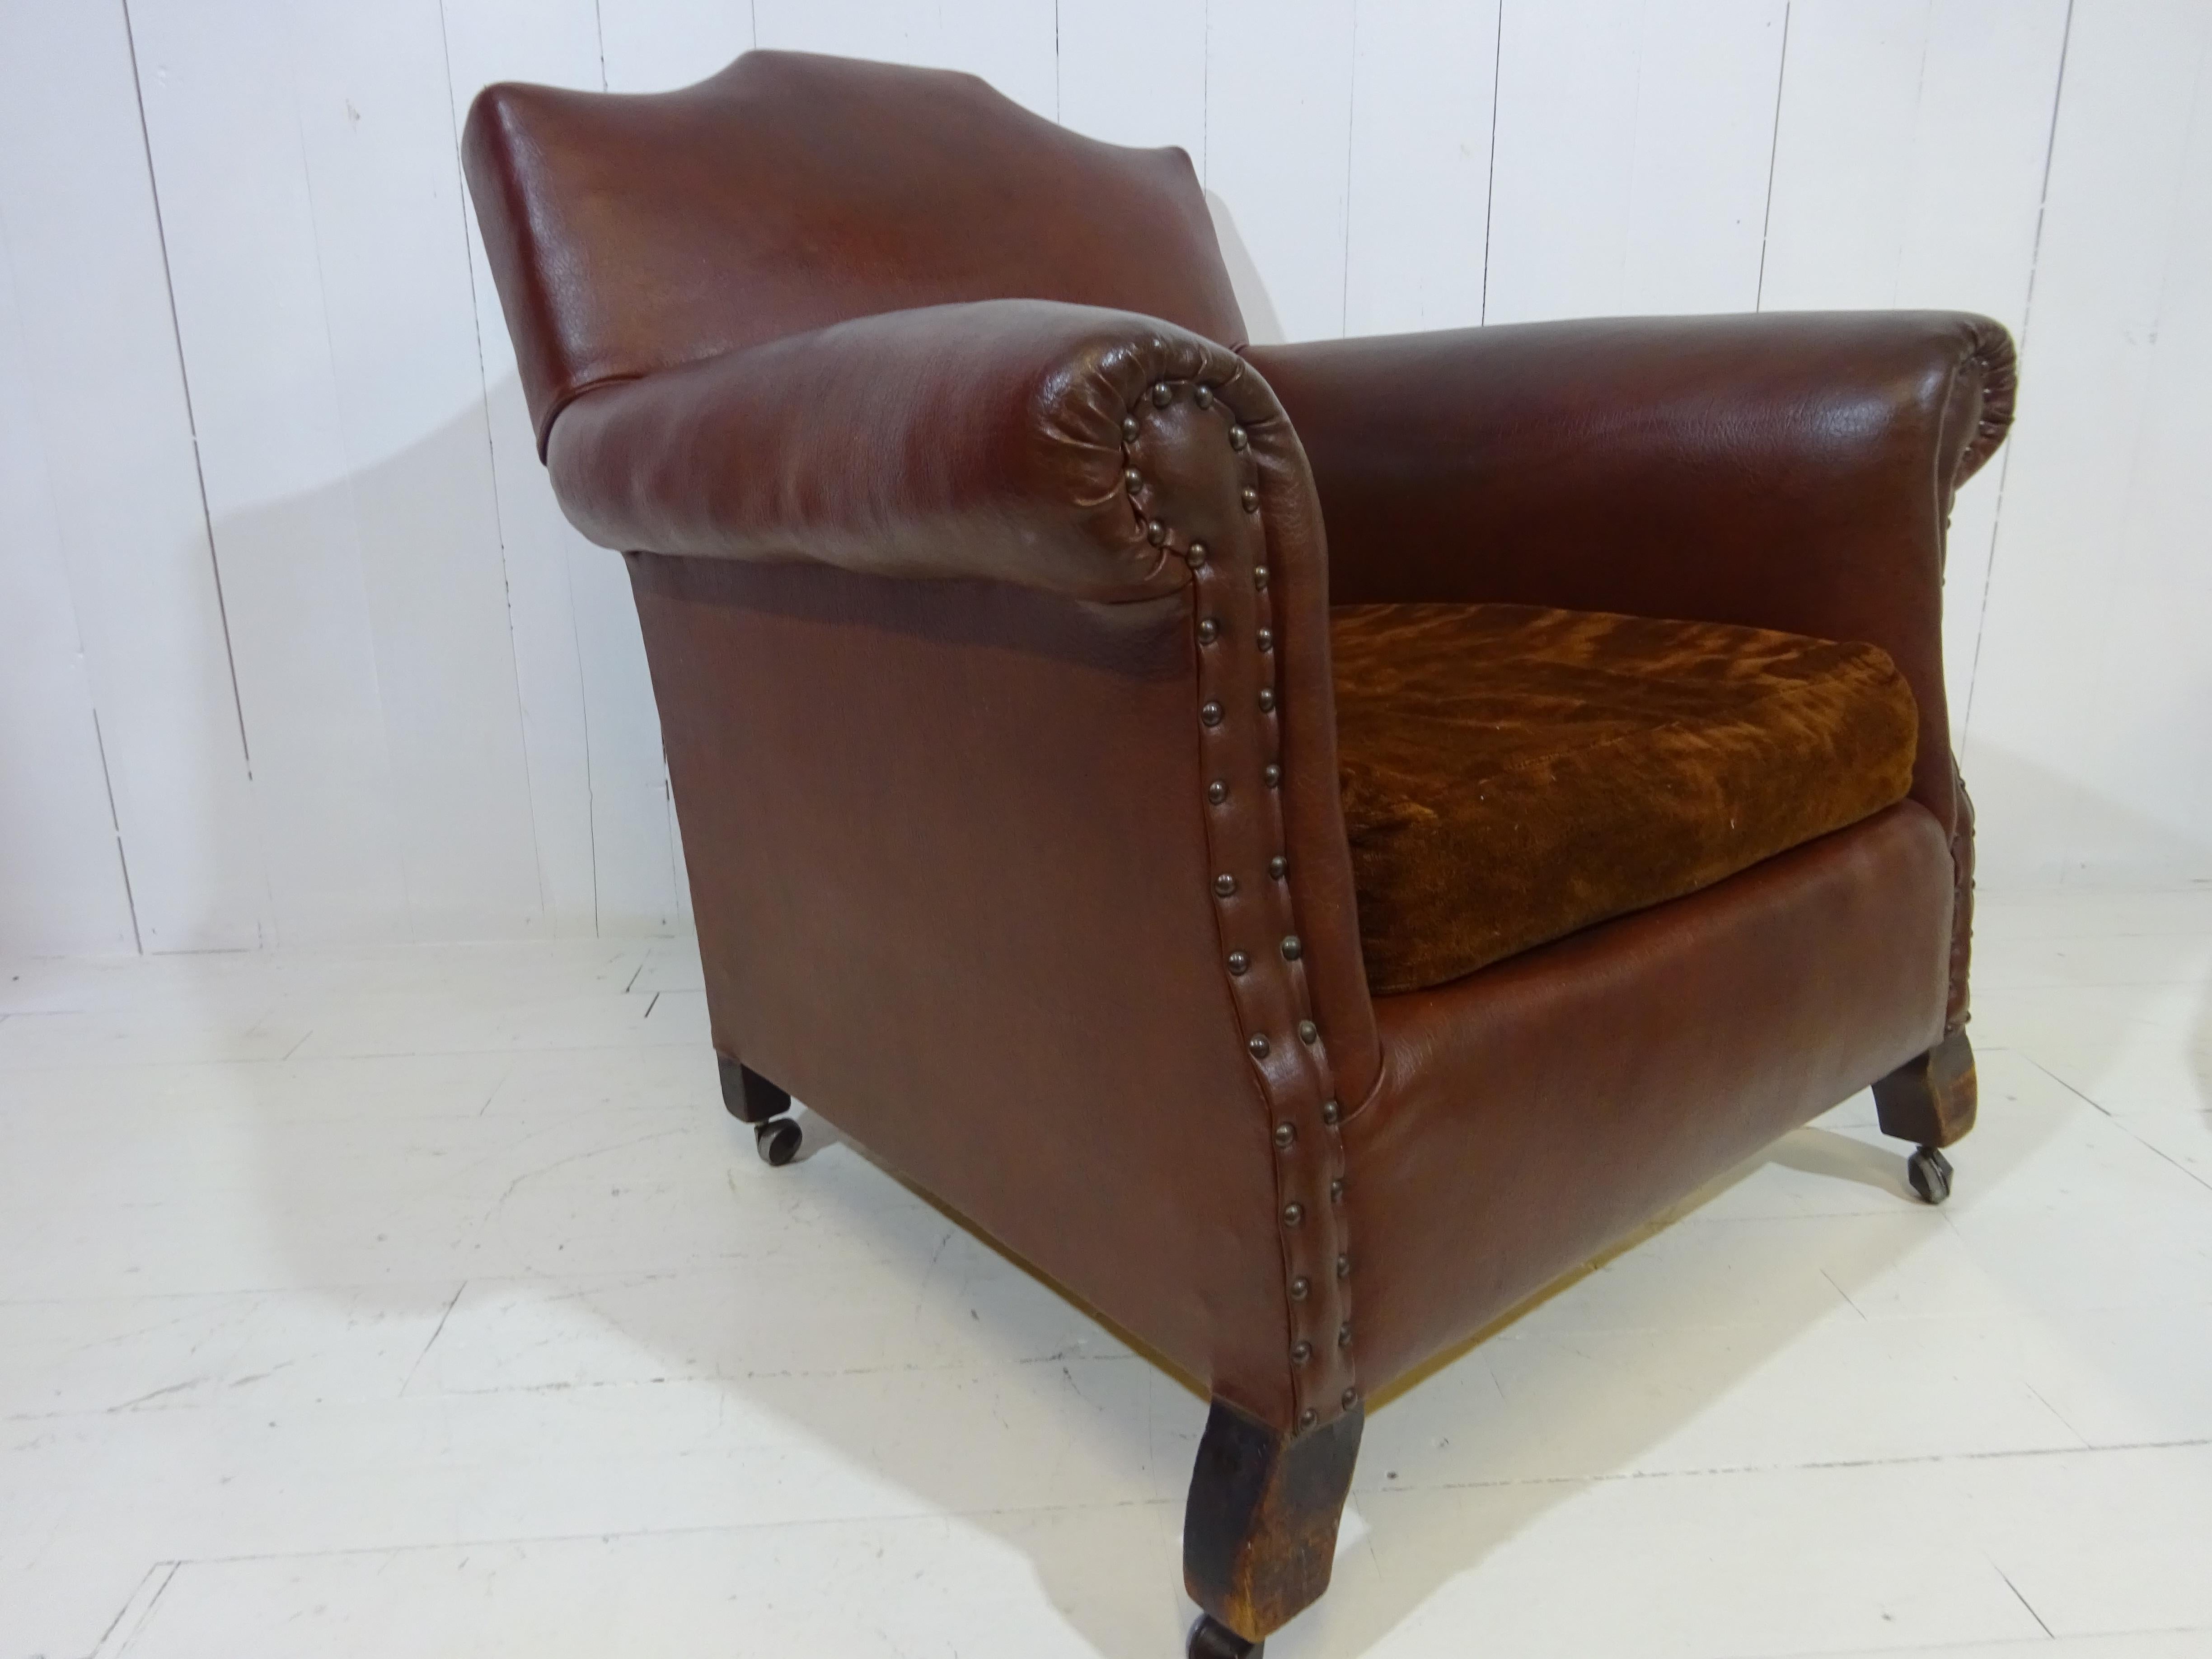 Original 1920's Art Deco Club Chair in Brown Faux Leather 1